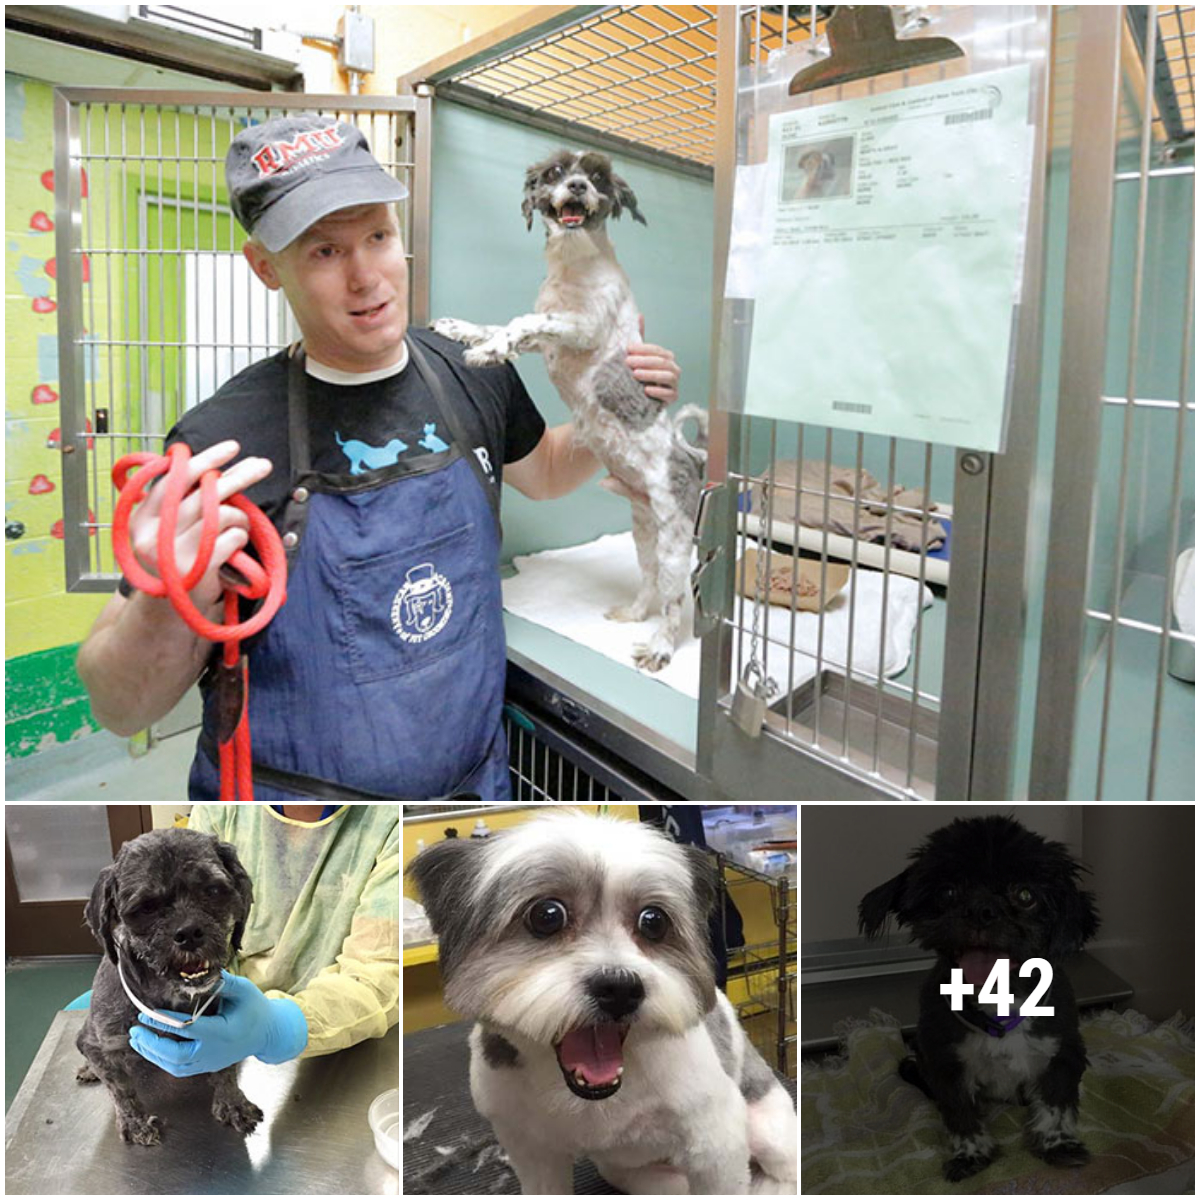 The small act of a man giving free haircuts to dogs at the shelter to help them find homes when they have a better appearance has received the admiration of many people